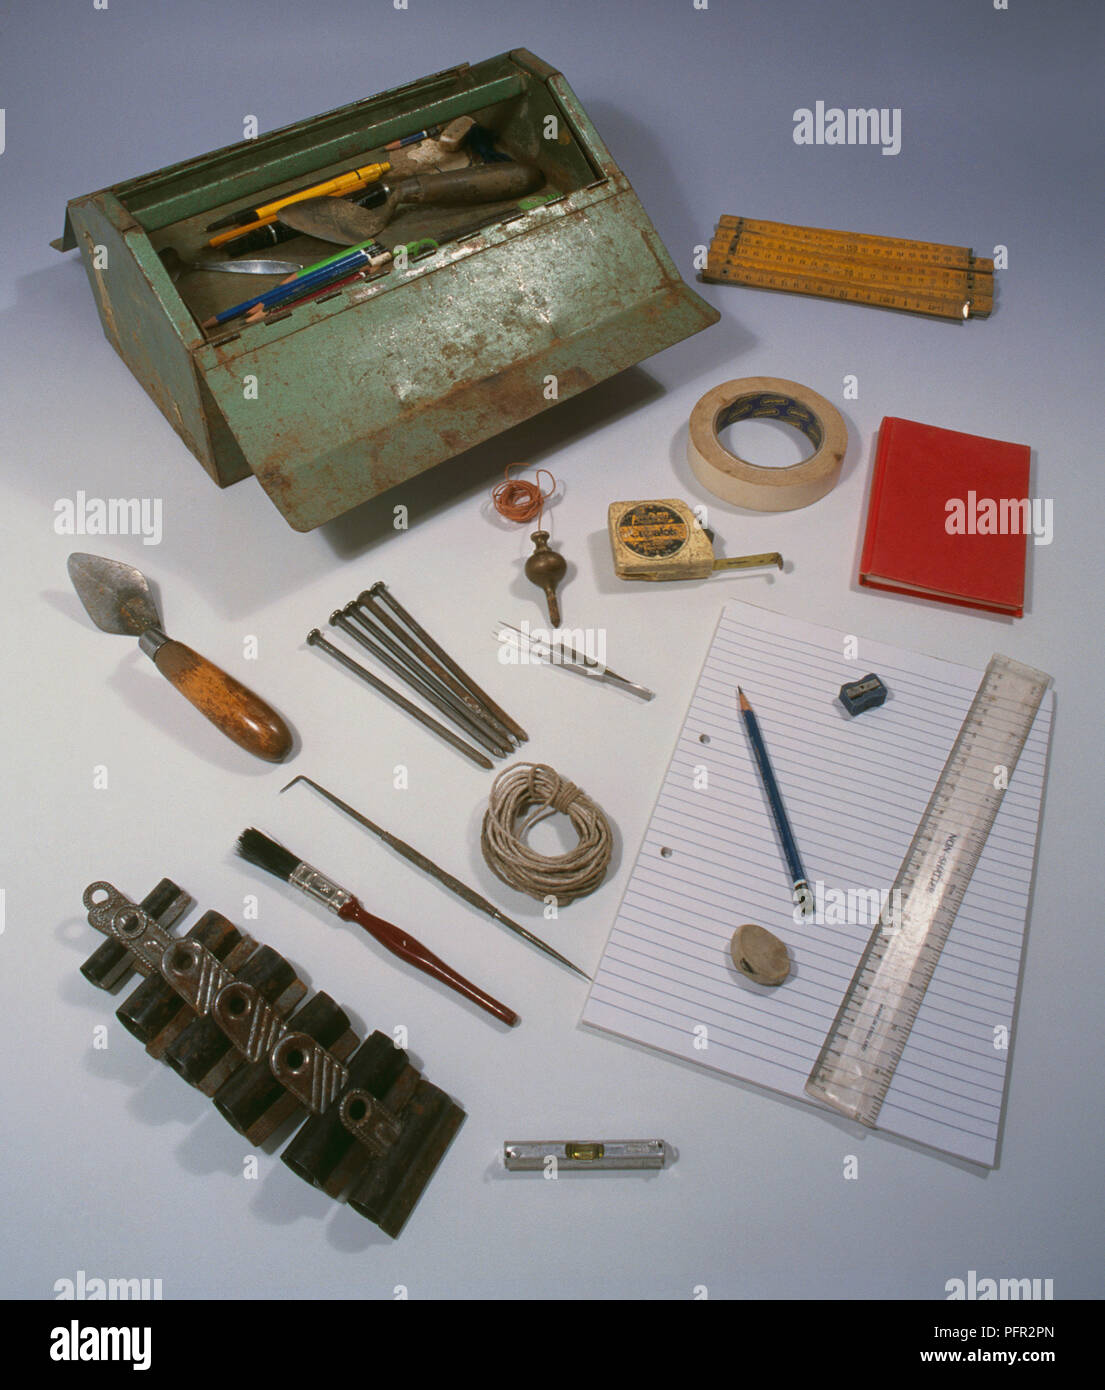 Archaeology tools and old toolbox Stock Photo